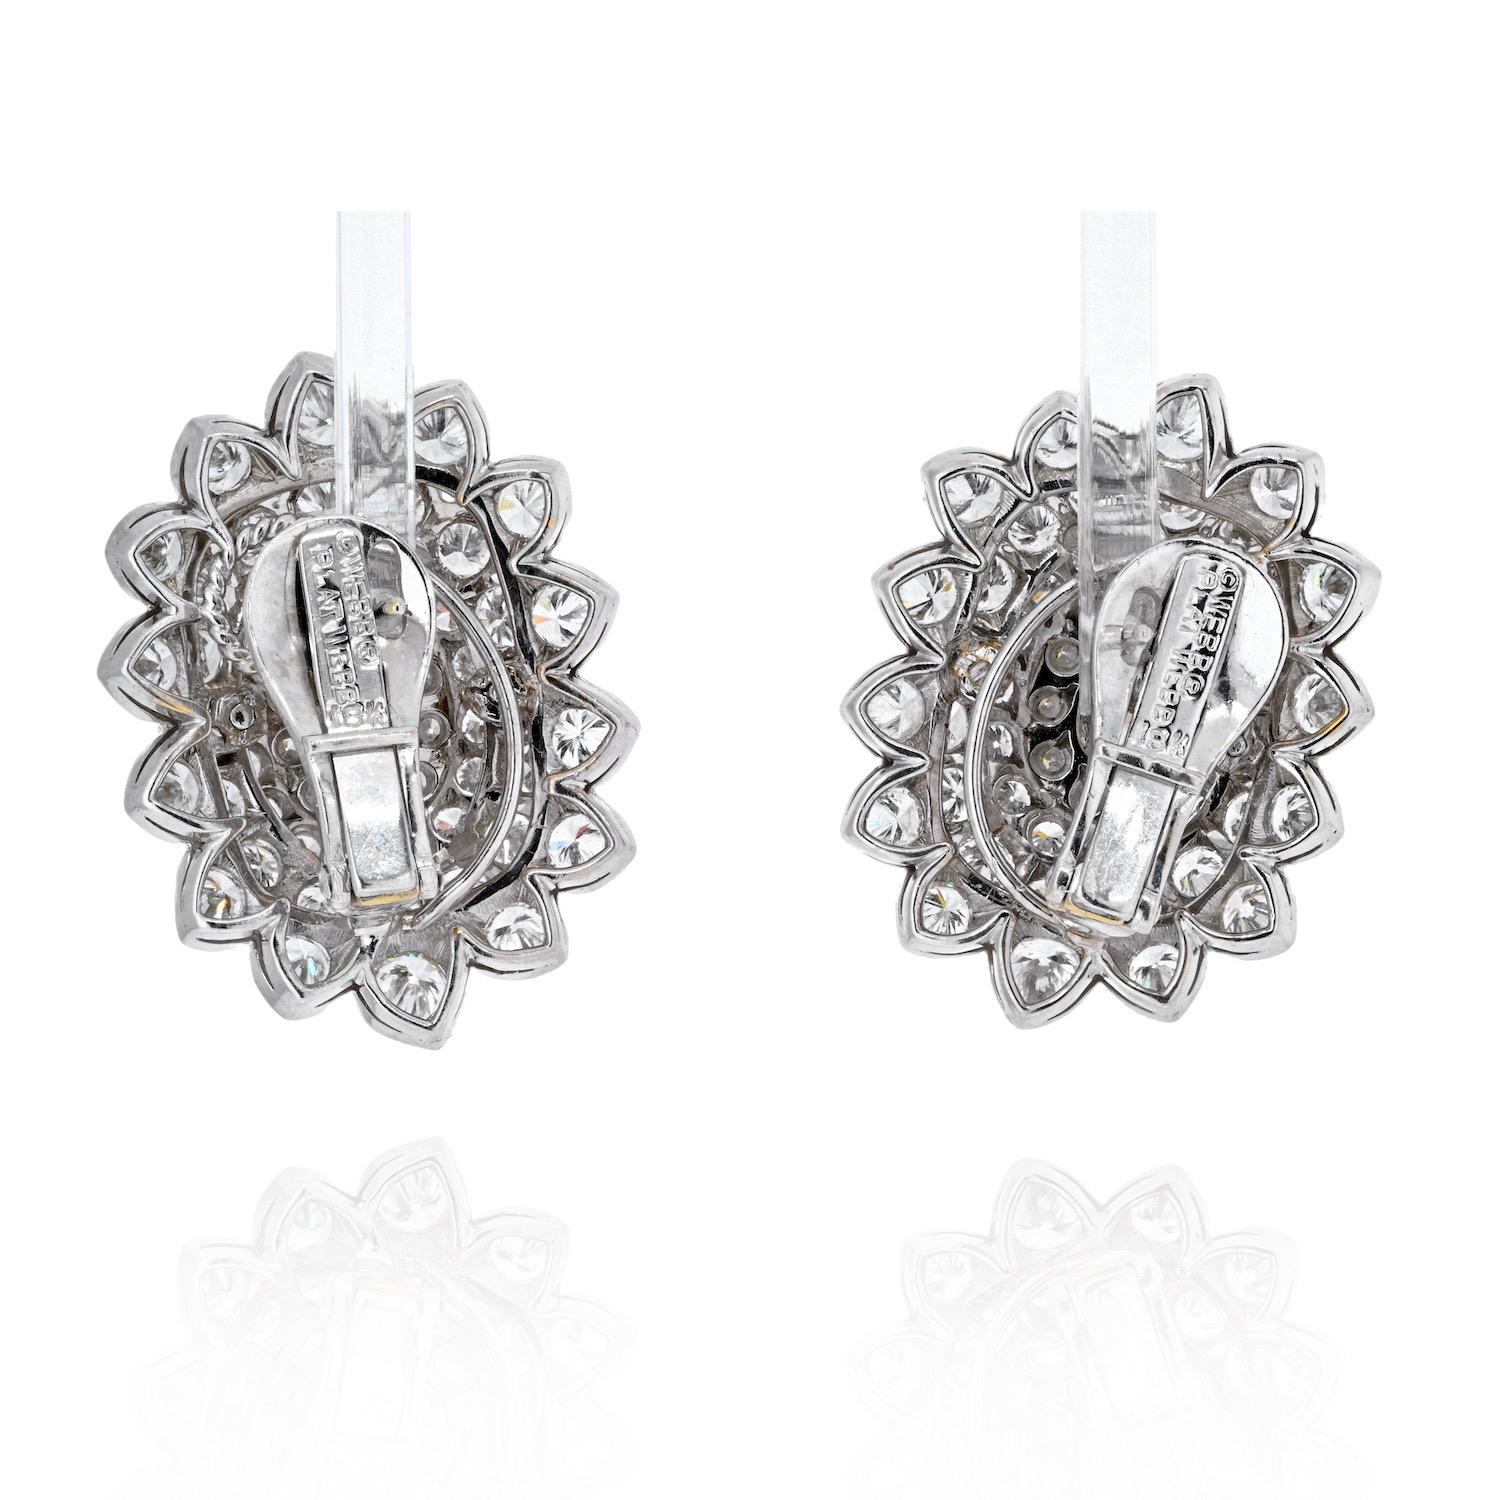 David Webb clusted diamond earrings mounted with a center oval and round cut diamonds. These earrings are crafted mainly in 18K White gold, with some platinum. 
Each earring is set with an oval cut diamond in the center and  within a surround of